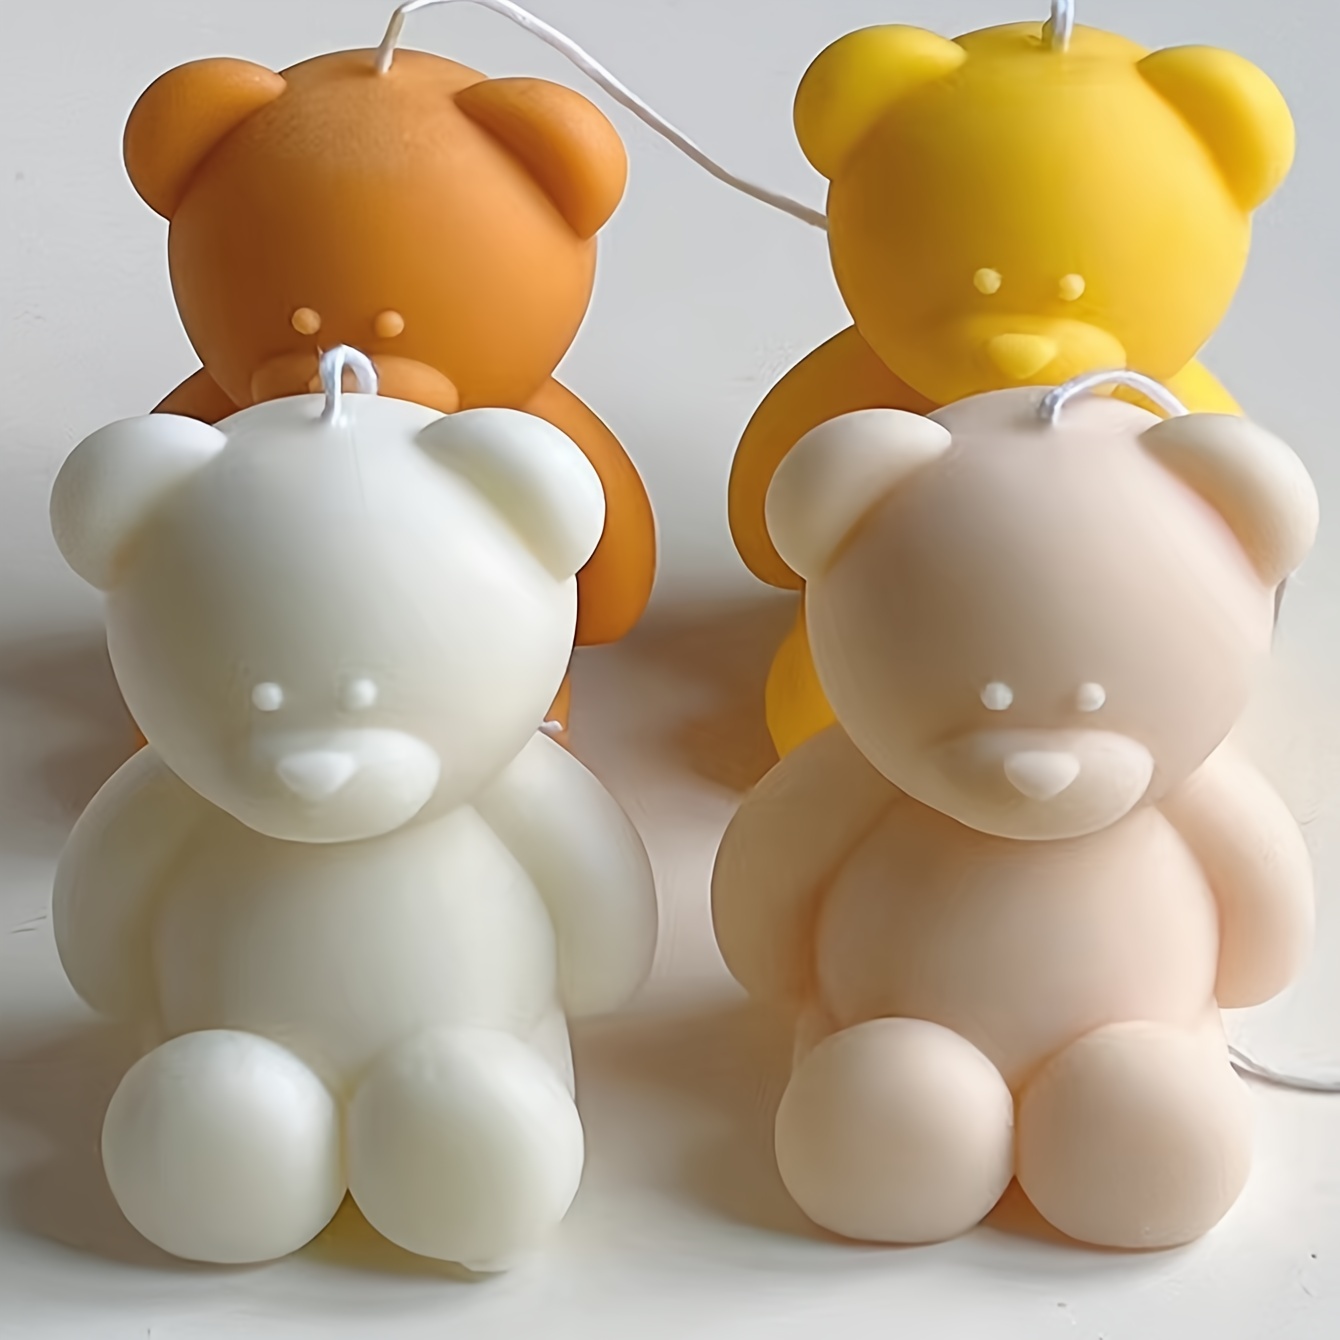 Teddy Bear Silicone Mold Aromatherapy Candle Mold Plaster Soap Wax